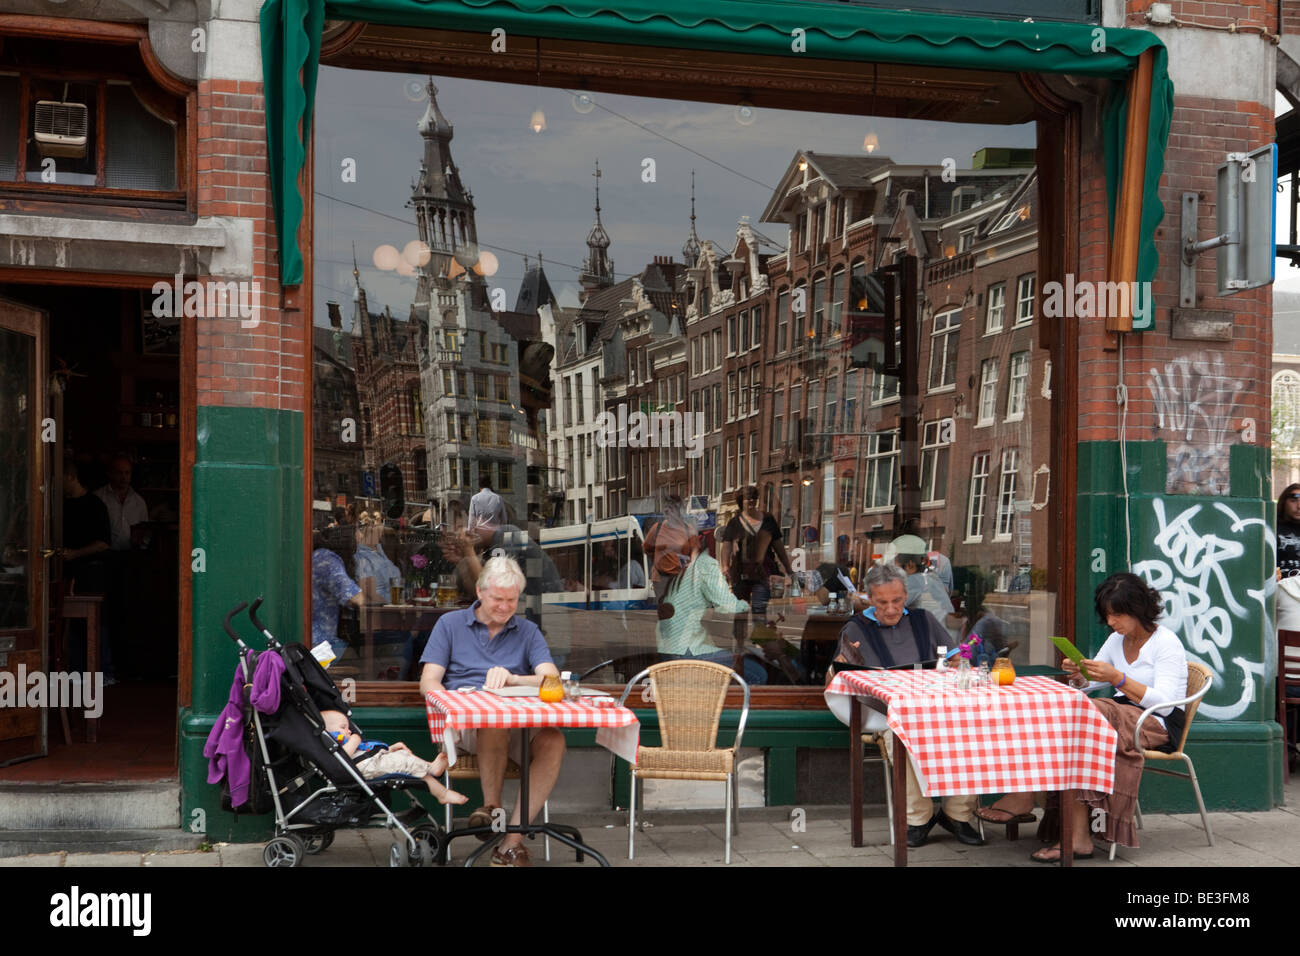 Restaurant with tables outdoor in the street and reflection of the traditional houses in the window. Amsterdam, Holland Stock Photo